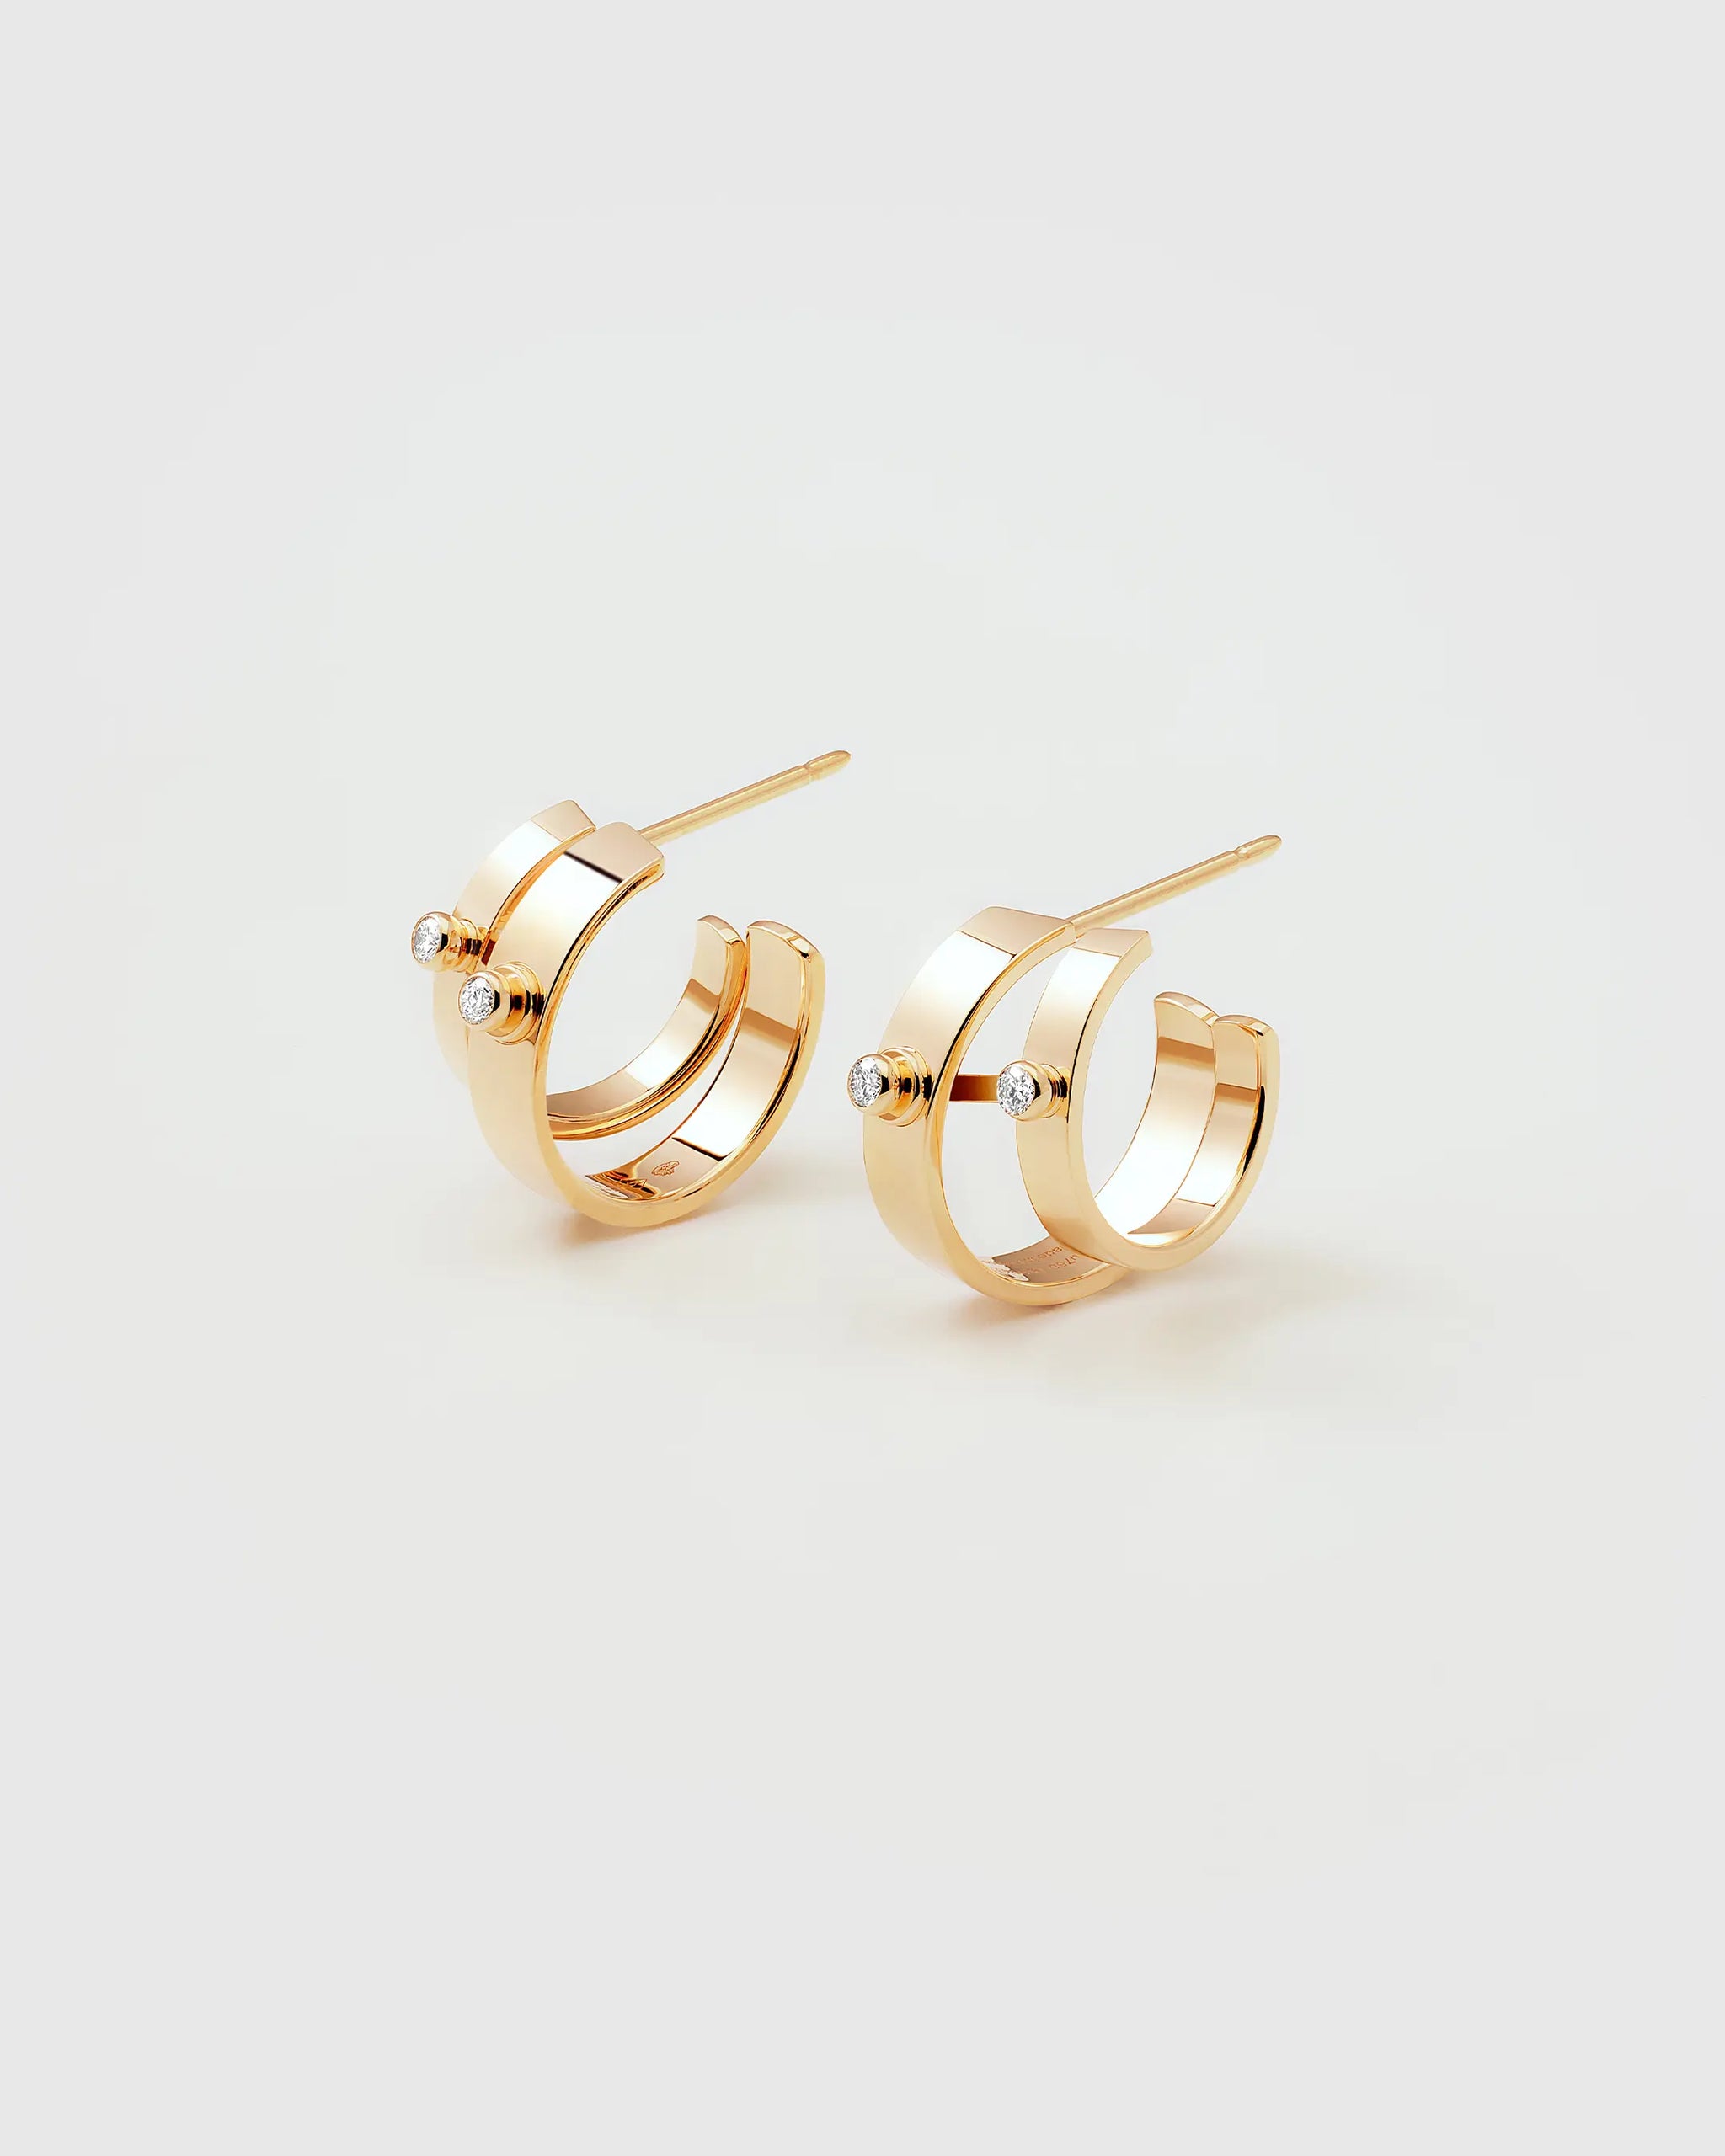 Monday Morning Mood Double Hoops in Yellow Gold - 1 - Nouvel Heritage